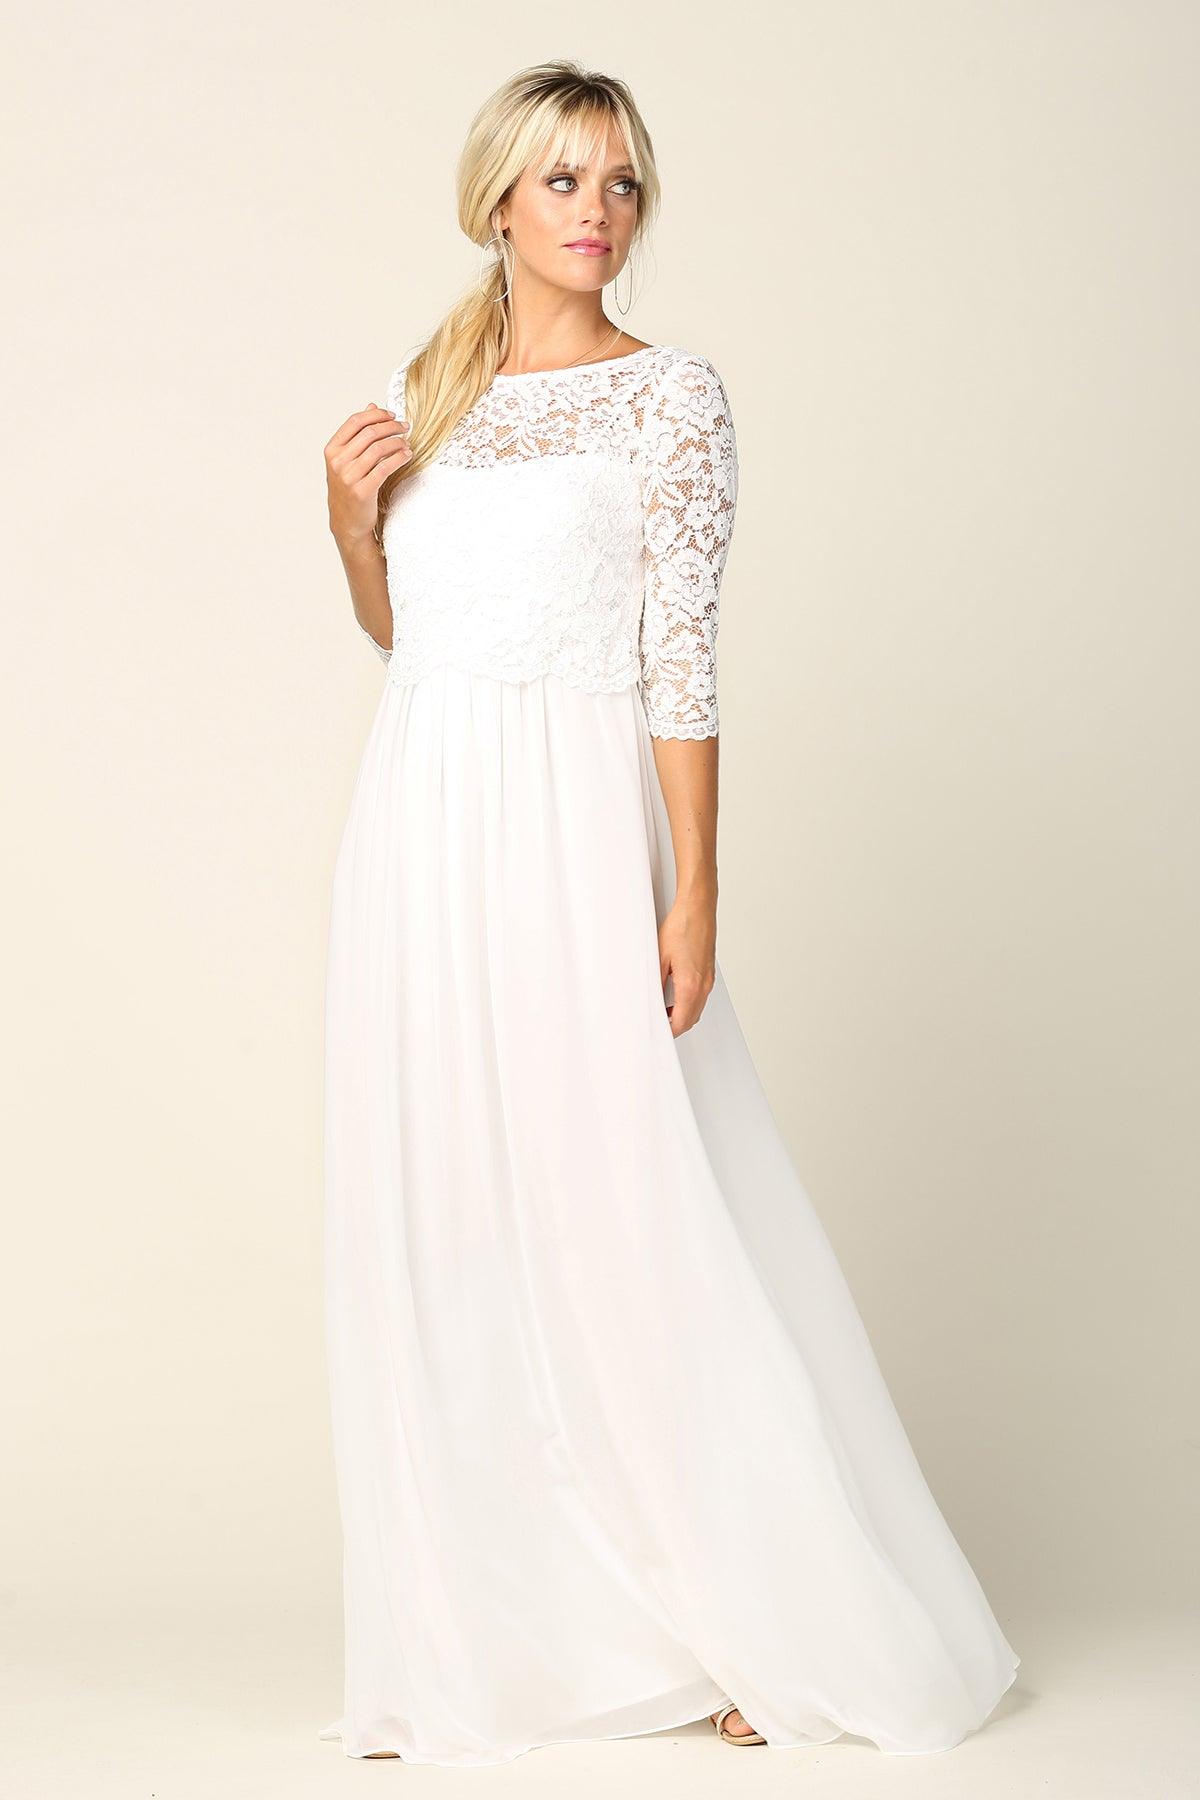 Simple Long 3/4 Sleeve Lace Chiffon Wedding Dress for $117.99 – The ...